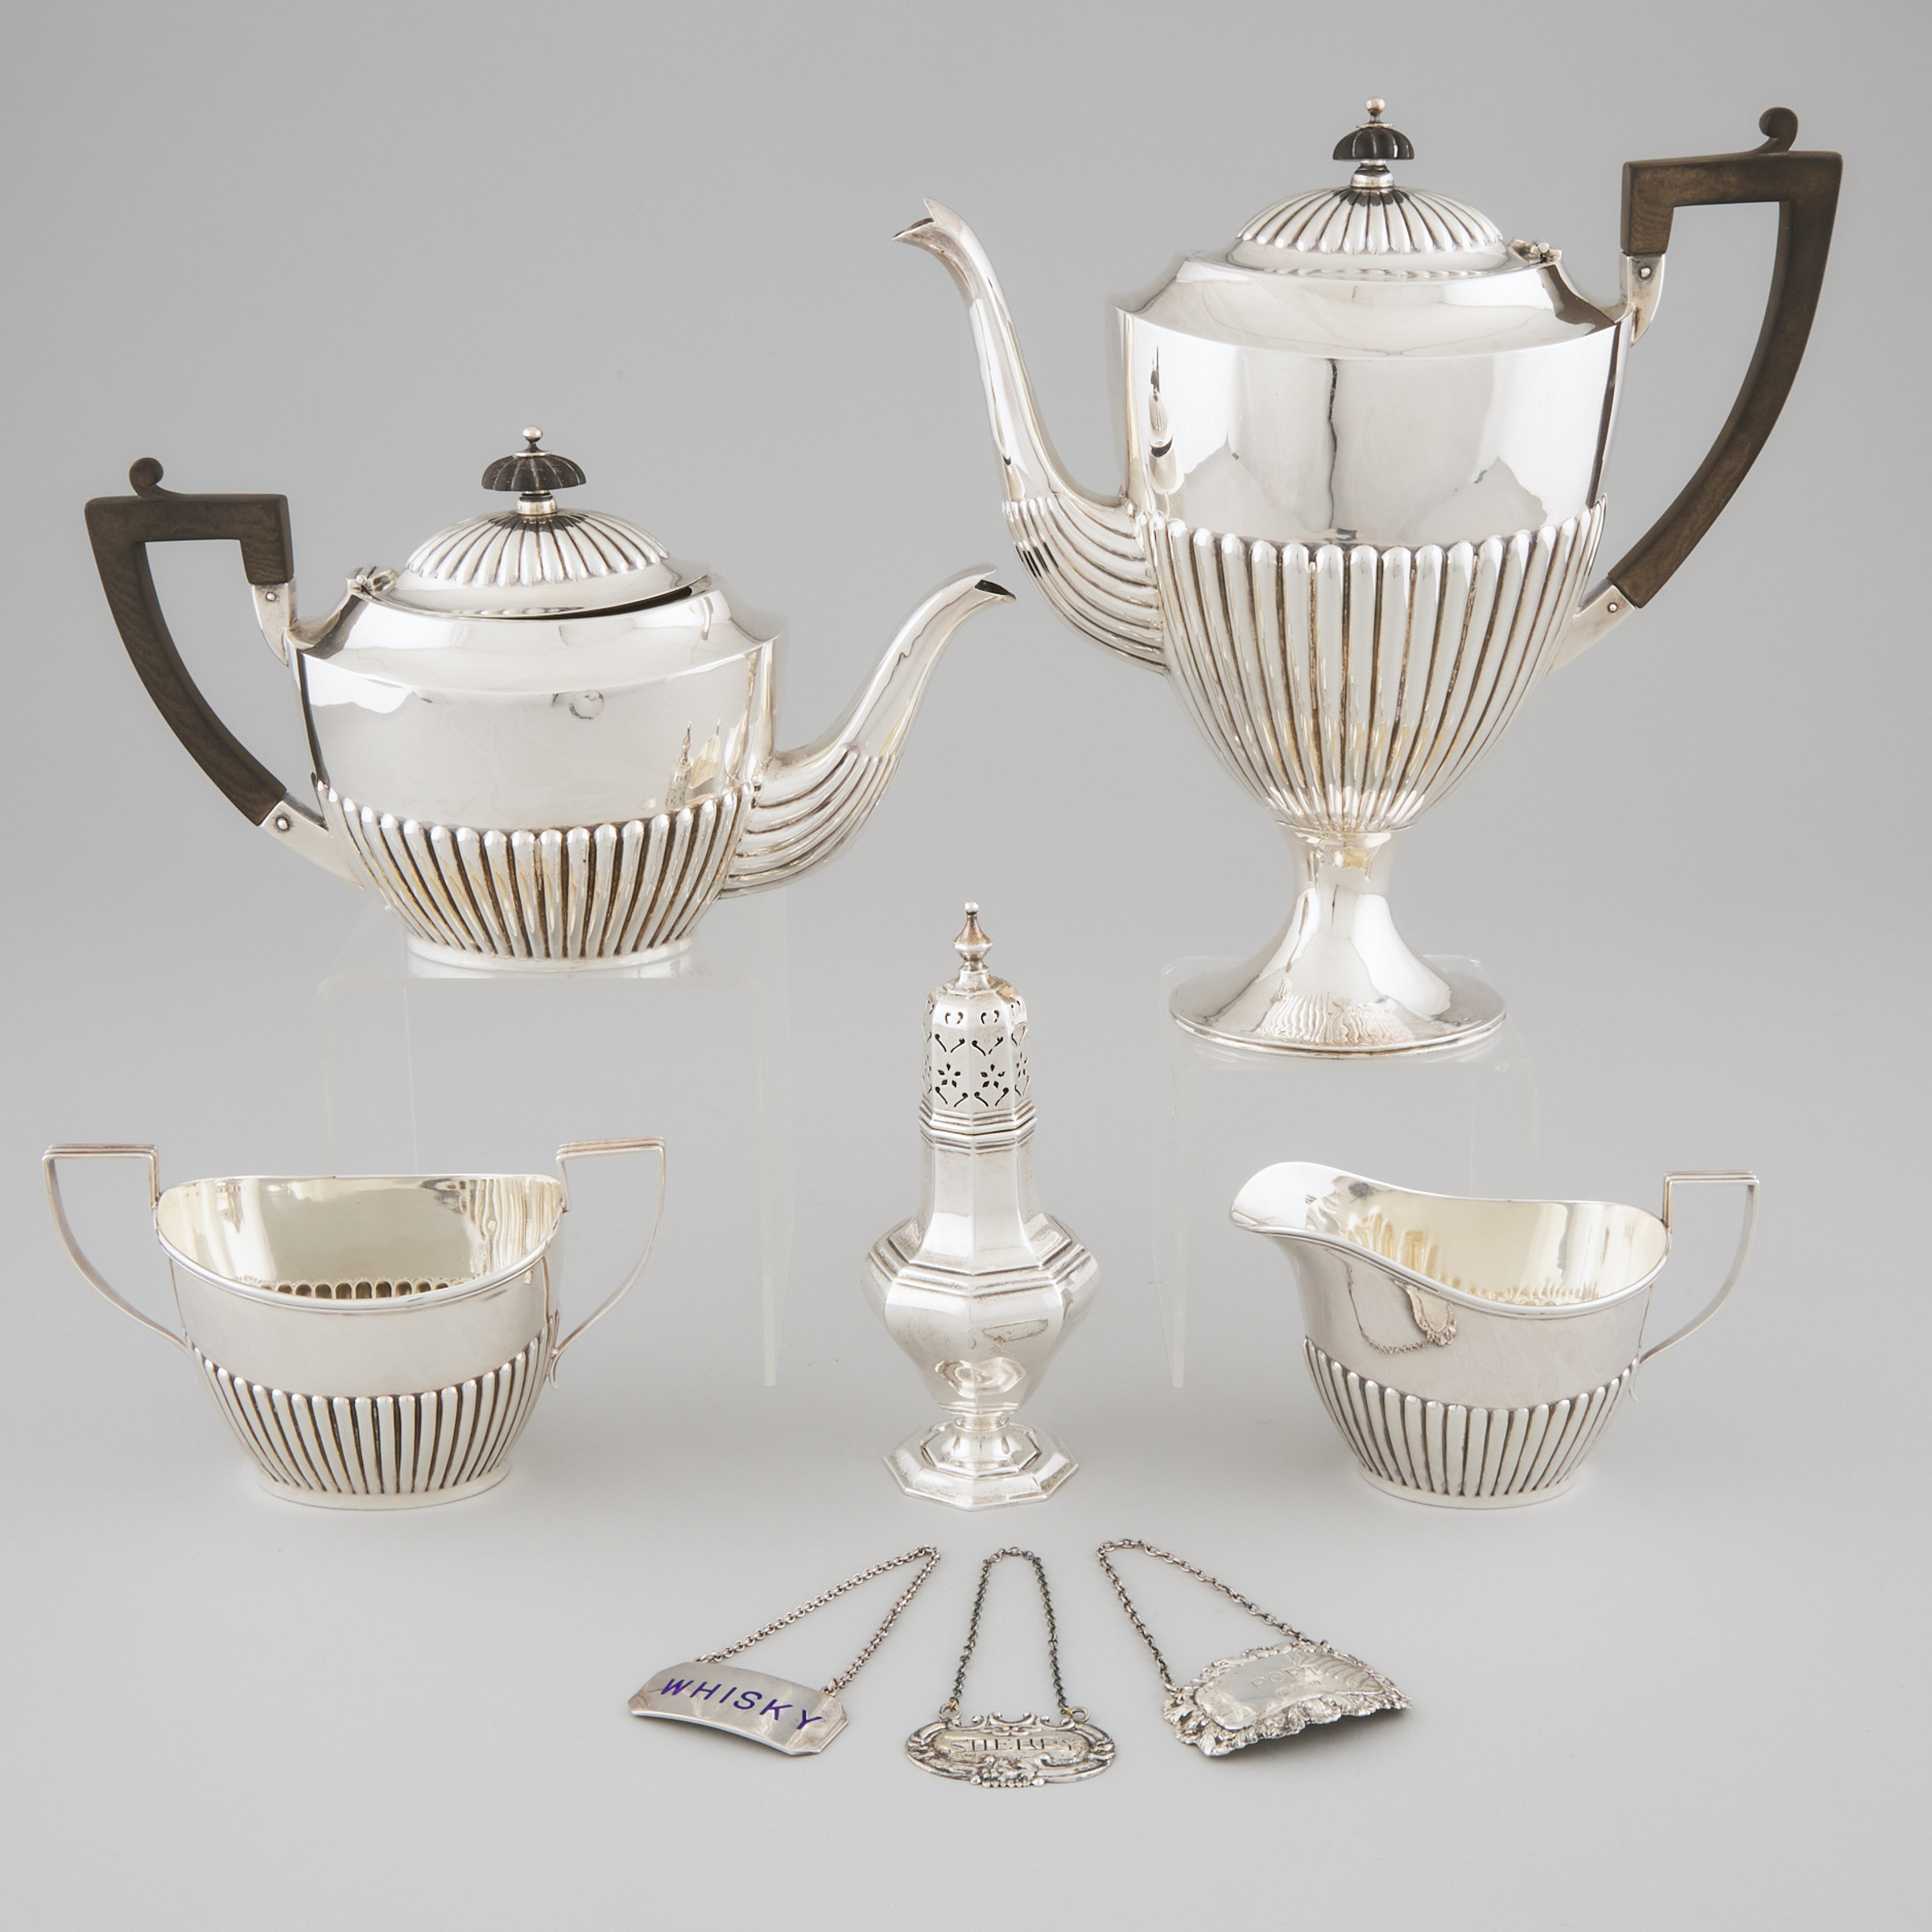 Canadian Silver Tea and Coffee Service, Toronto Silver Plate Co., Toronto, Ont., early 20th century